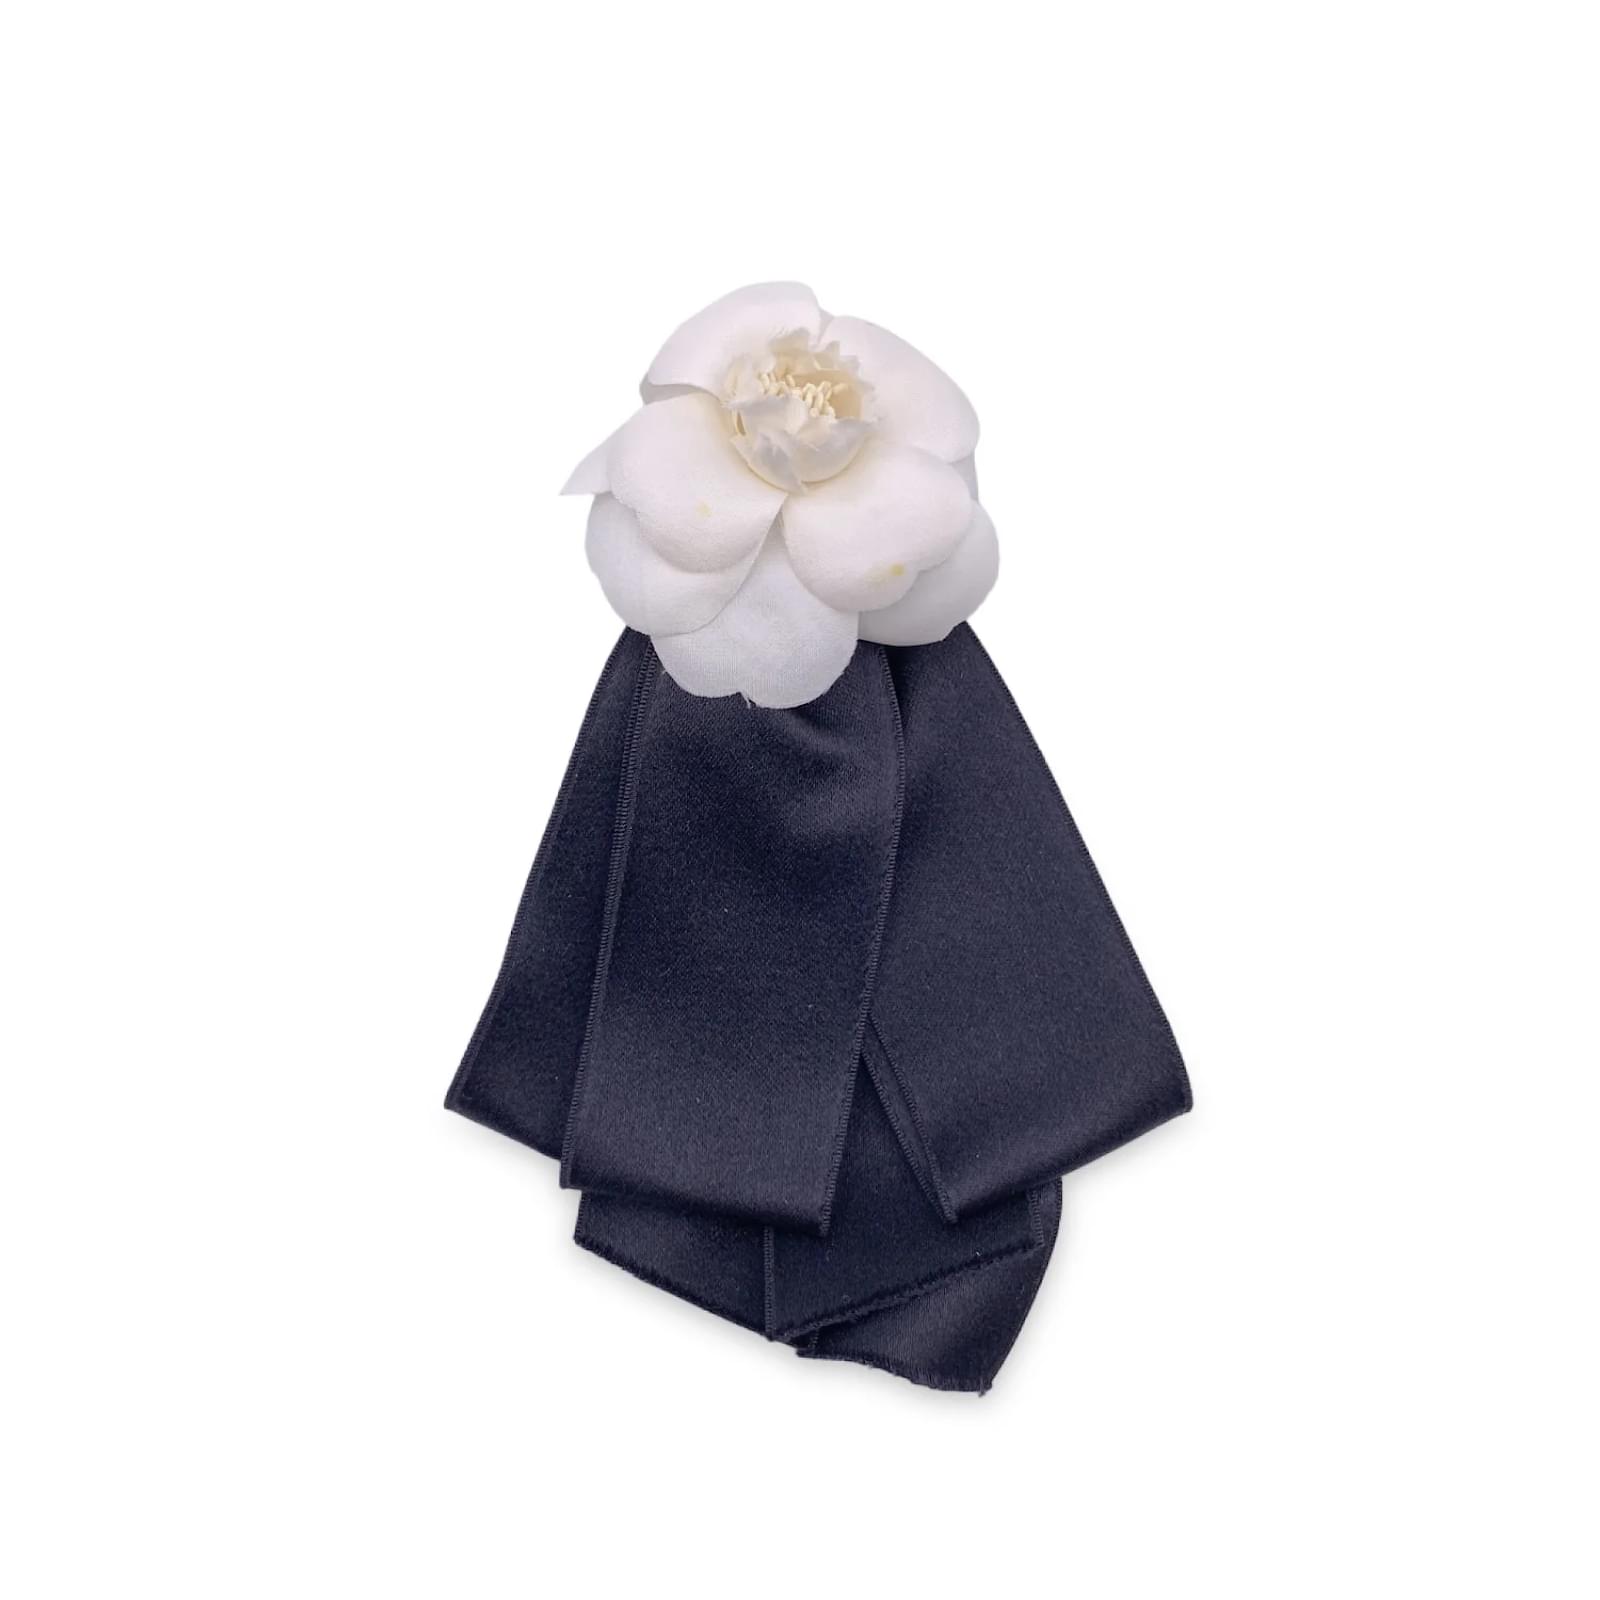 Vintage Black and White Silk Camellia Camelia Bow Brooch